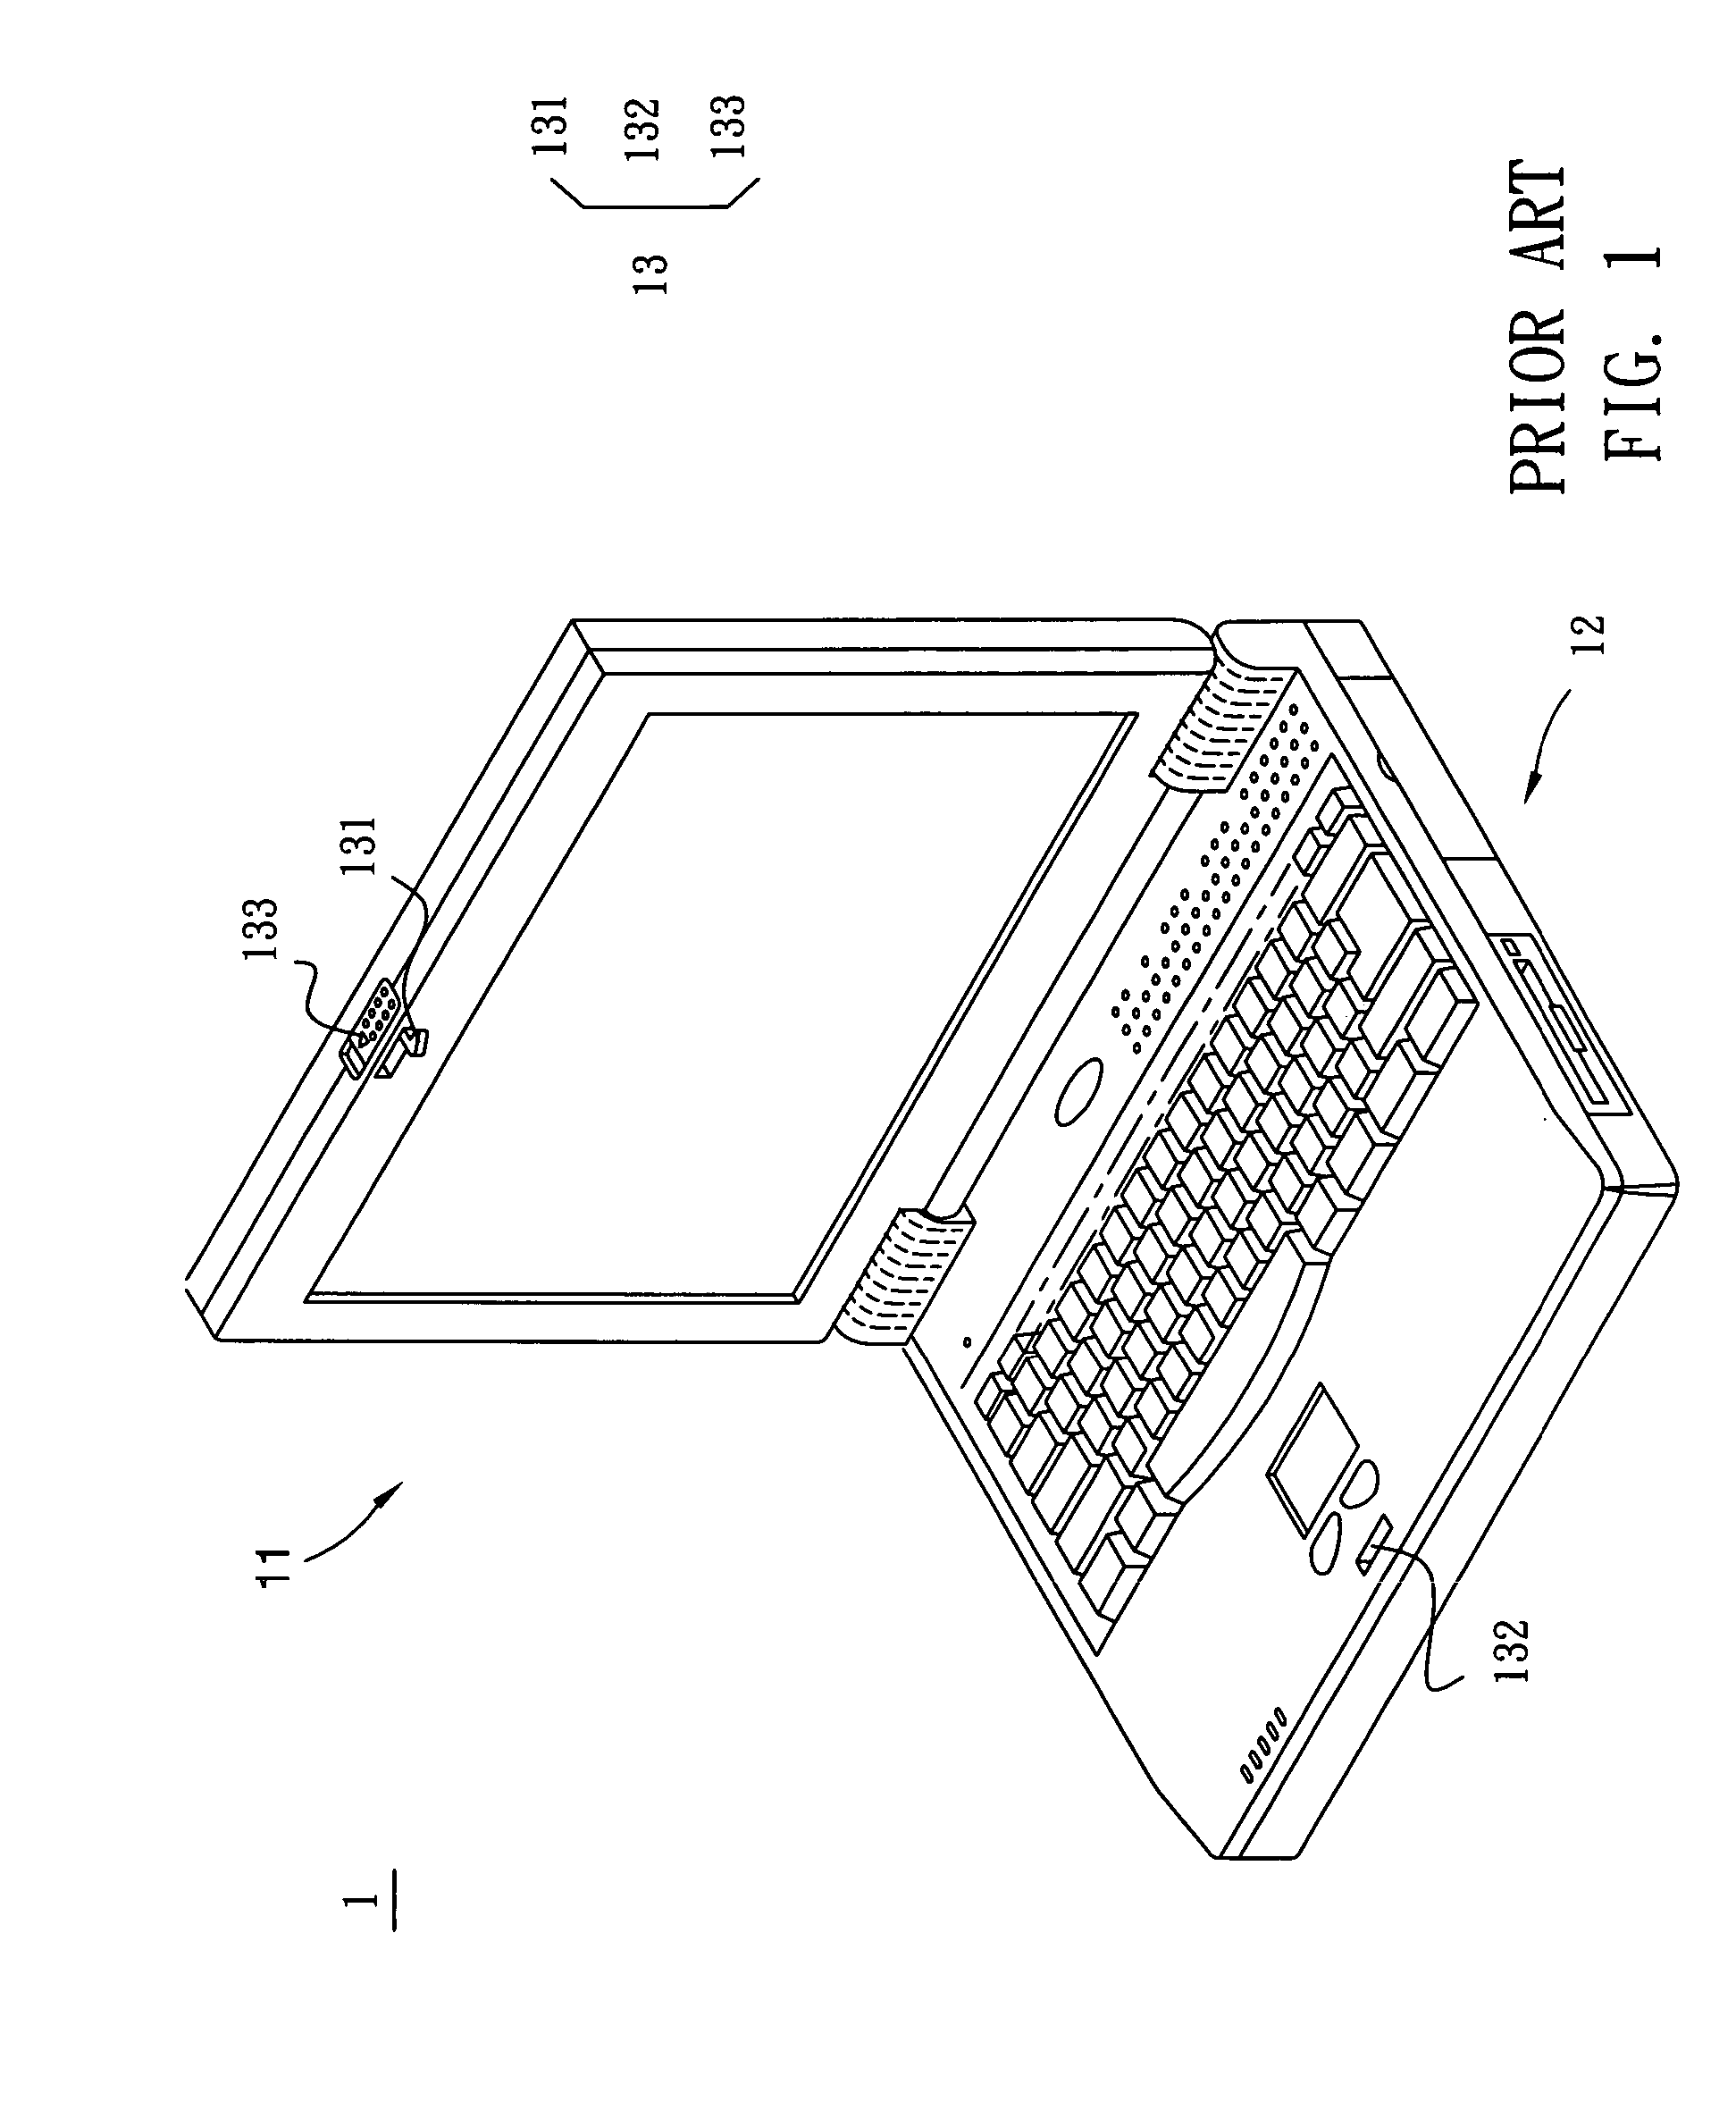 Multi-stage hinge assembly and electrical device